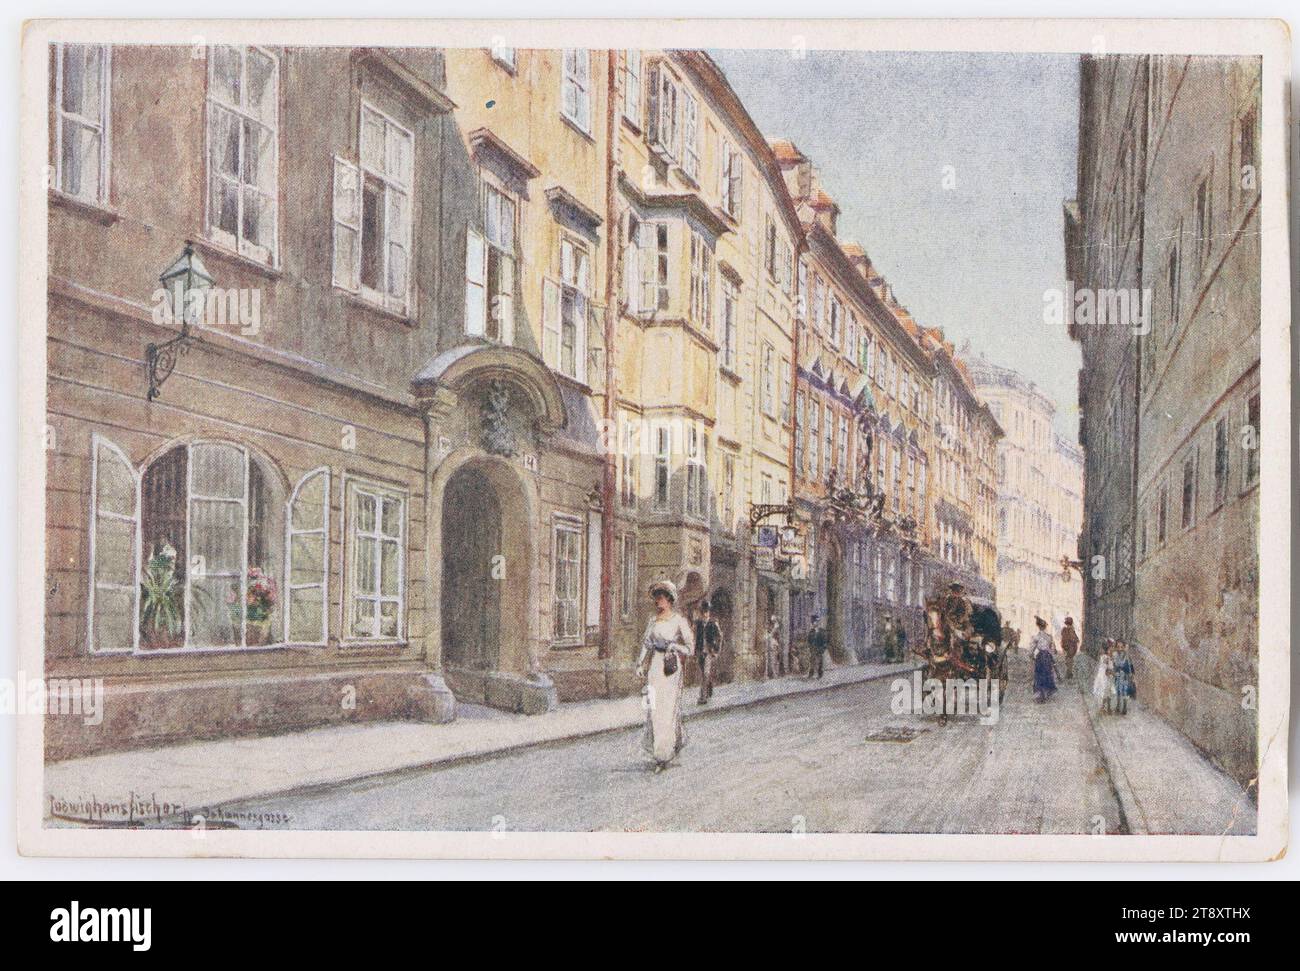 Ludwig Hans Fischer. Wien, I. Johannesgasse, 1923, coated paperboard, halftone print, Media and Communication, Postcards with transliteration, 1st District: Innere Stadt, street, the usual house or row of houses, flat-building, apartment house, house combined with store, with people, four-wheeled, animal-drawn vehicle, e.g.: cab, carriage, coach, handwriting, written text, Johannesgasse, The Vienna Collection Stock Photo